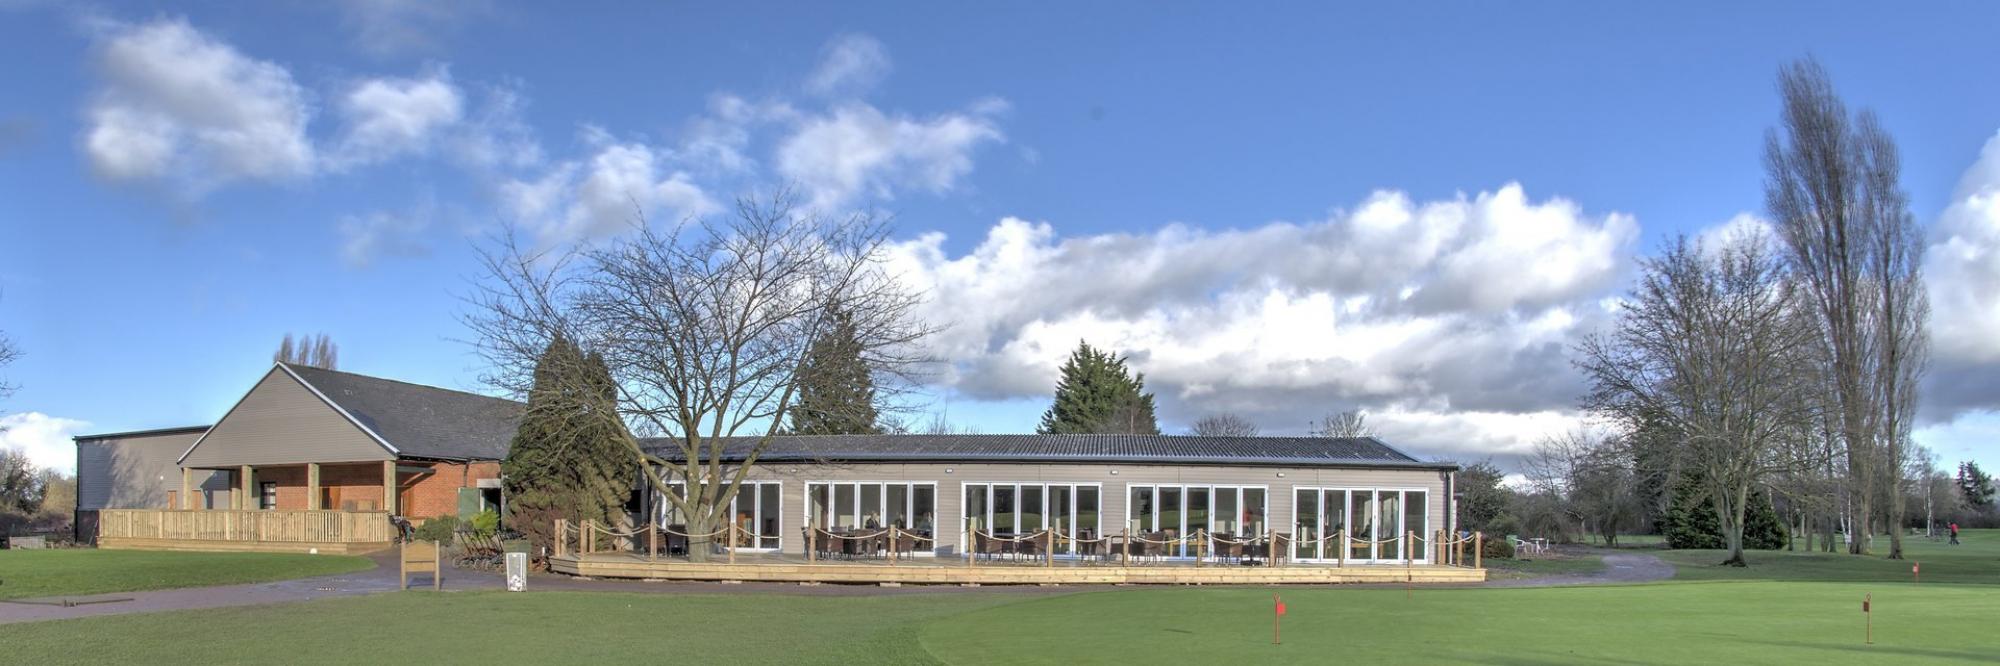 Weston Turville Golf Club Clubhouse